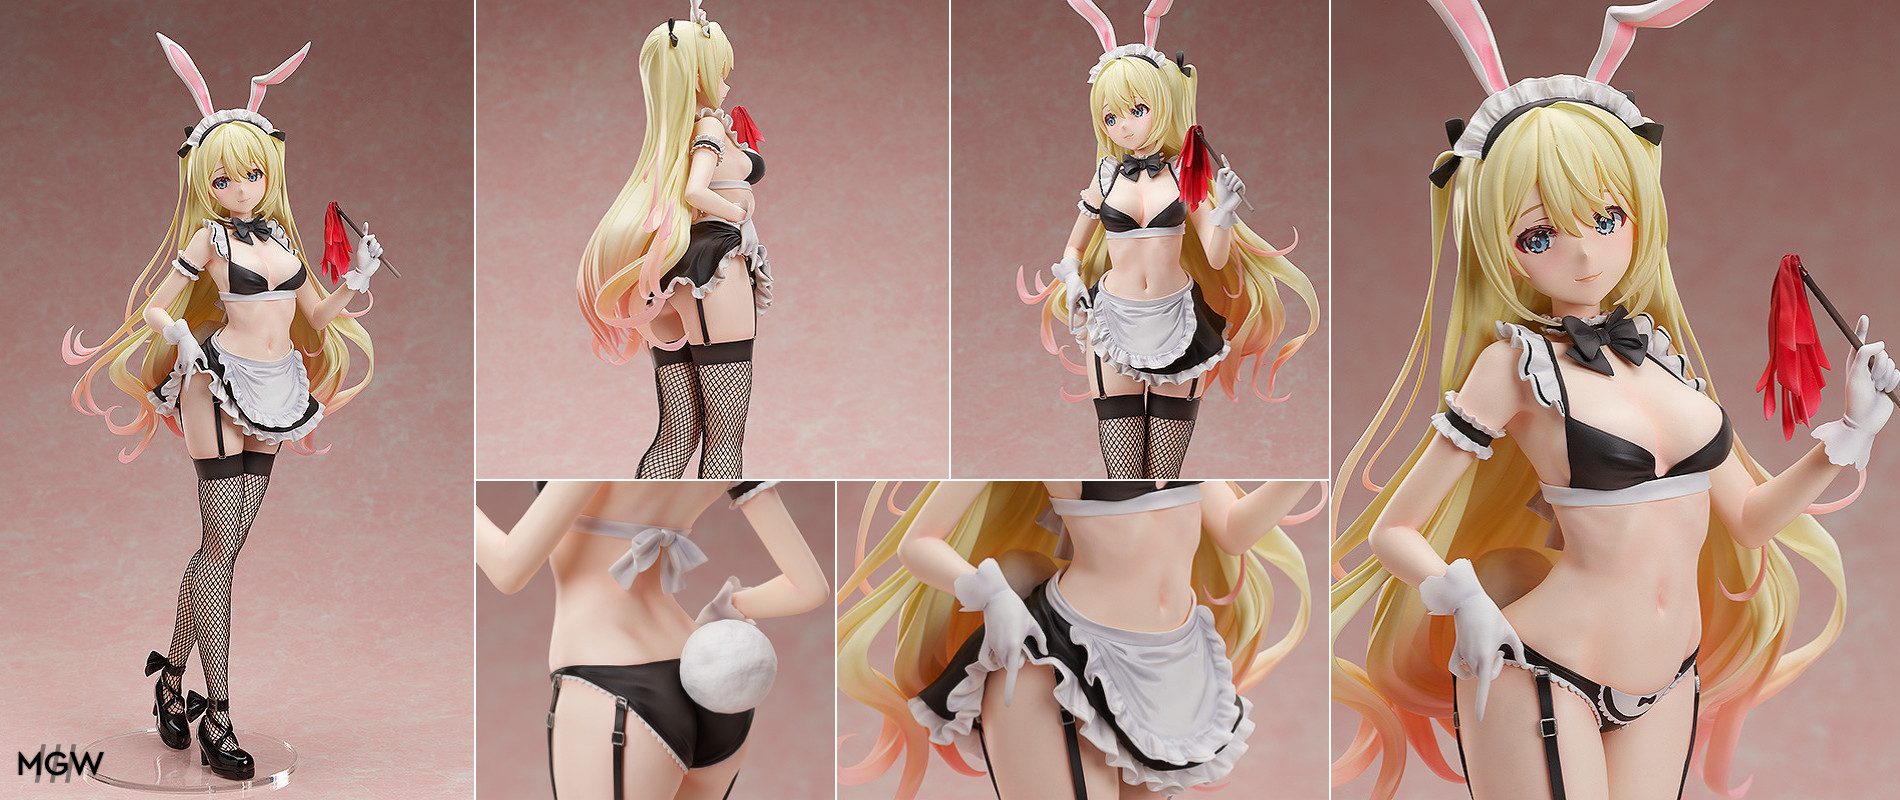 Eruru Maid Bunny Ver. by FREEing with illustration by DSmile MyGrailWatch Anime Figure Guide